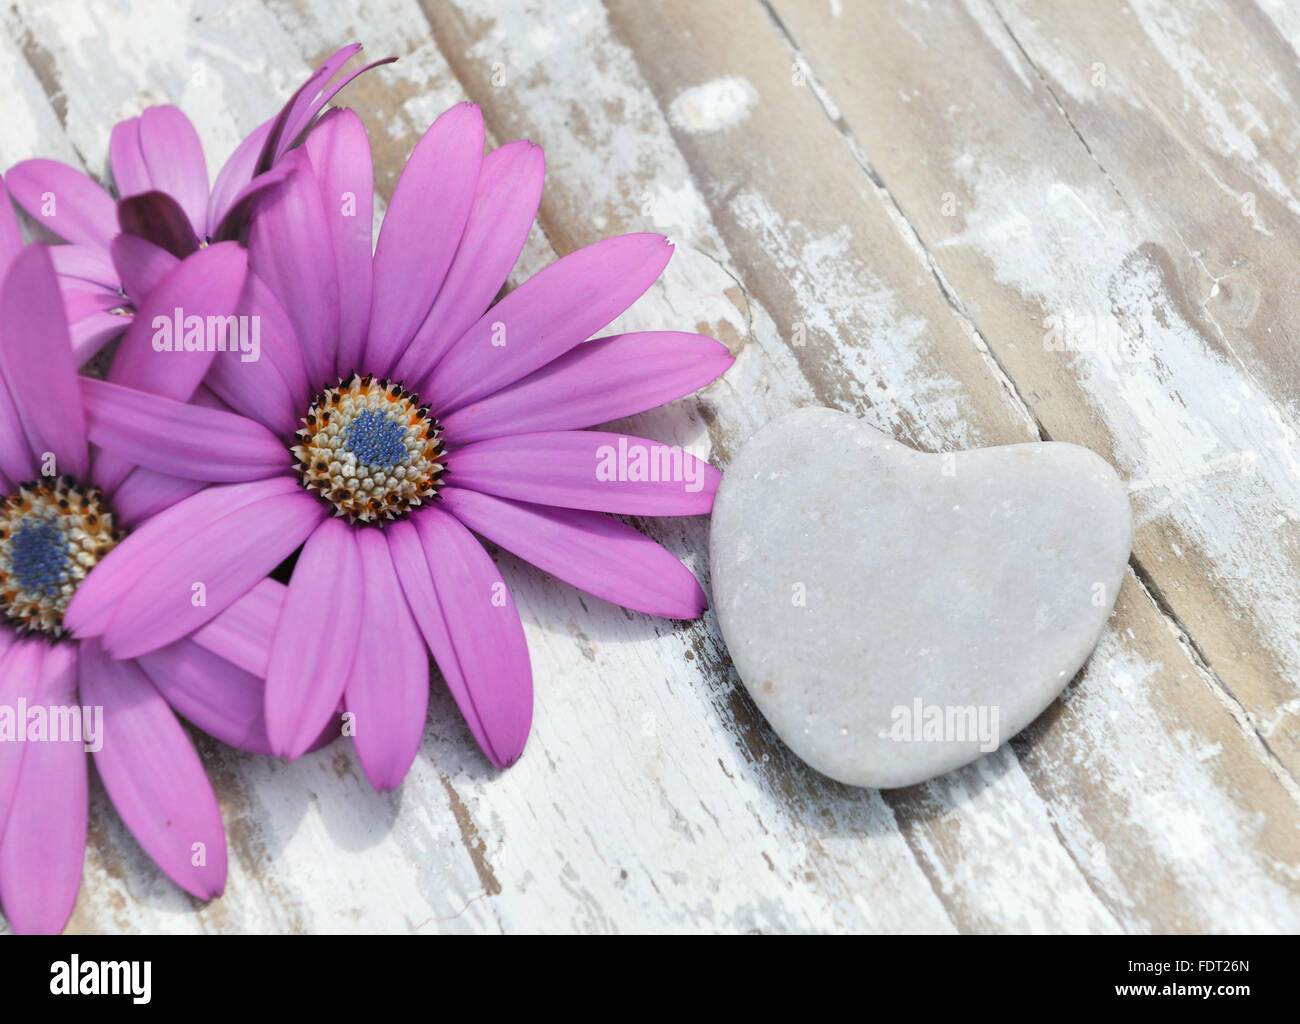 heart shaped pebble and flowers on white table Stock Photo